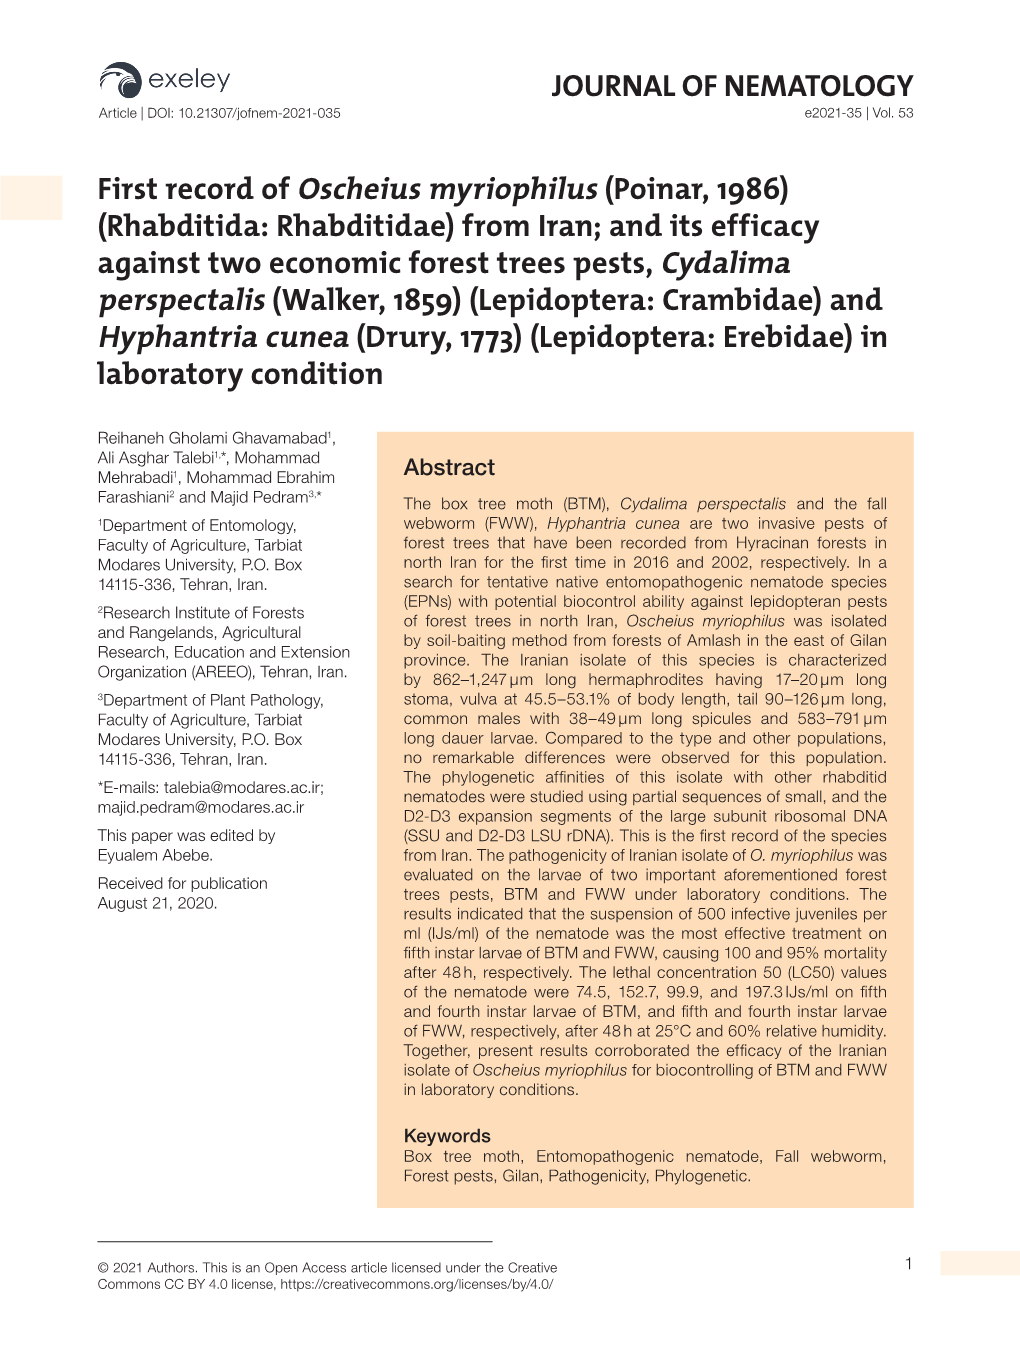 JOURNAL of NEMATOLOGY First Record of Oscheius Myriophilus (Poinar, 1986) (Rhabditida: Rhabditidae) from Iran; and Its Efficacy